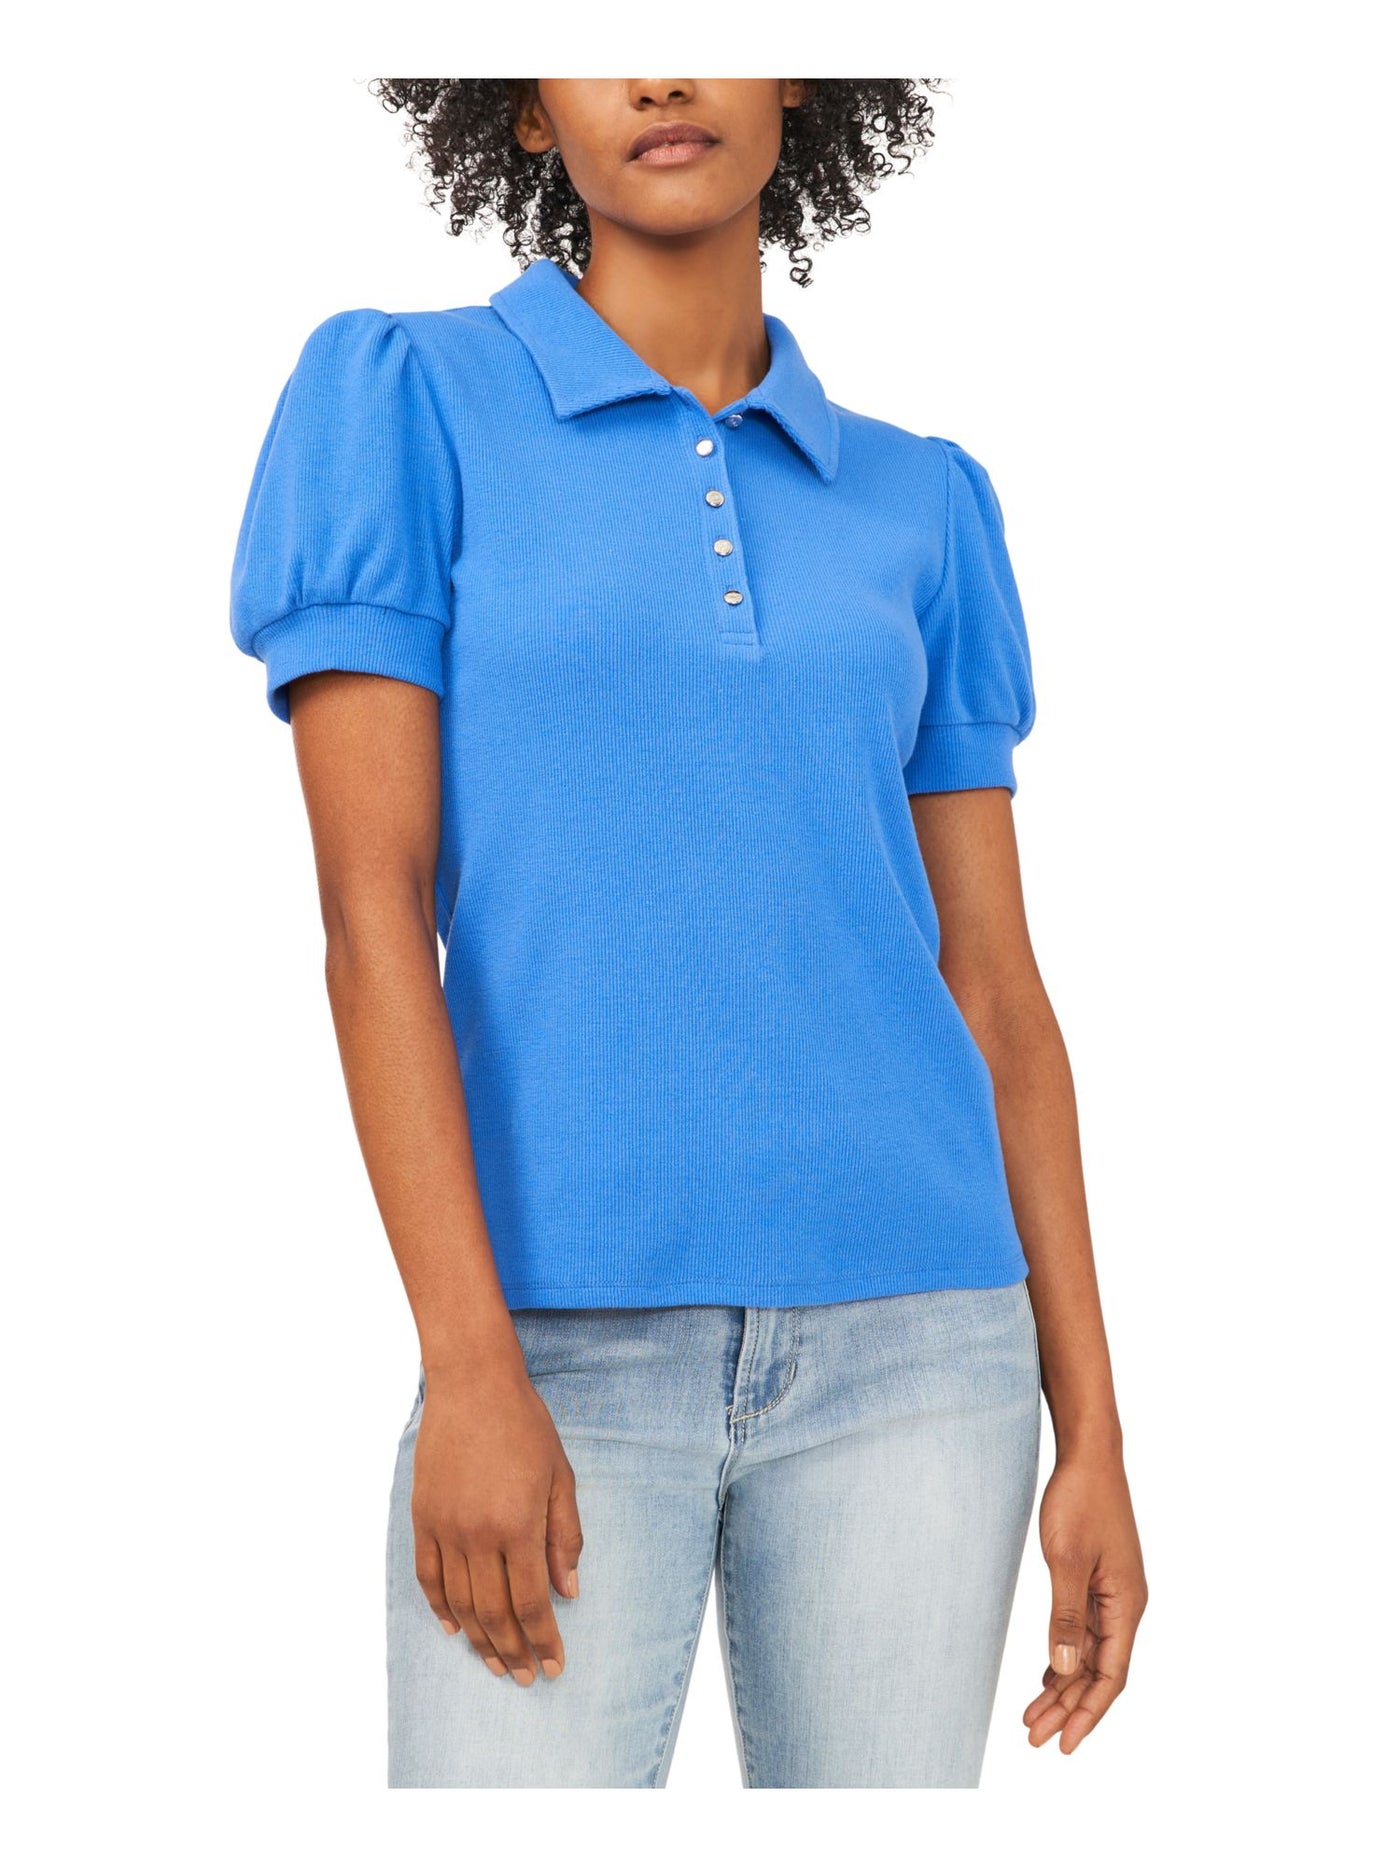 RILEY&RAE Womens Blue Stretch Collared Top XS